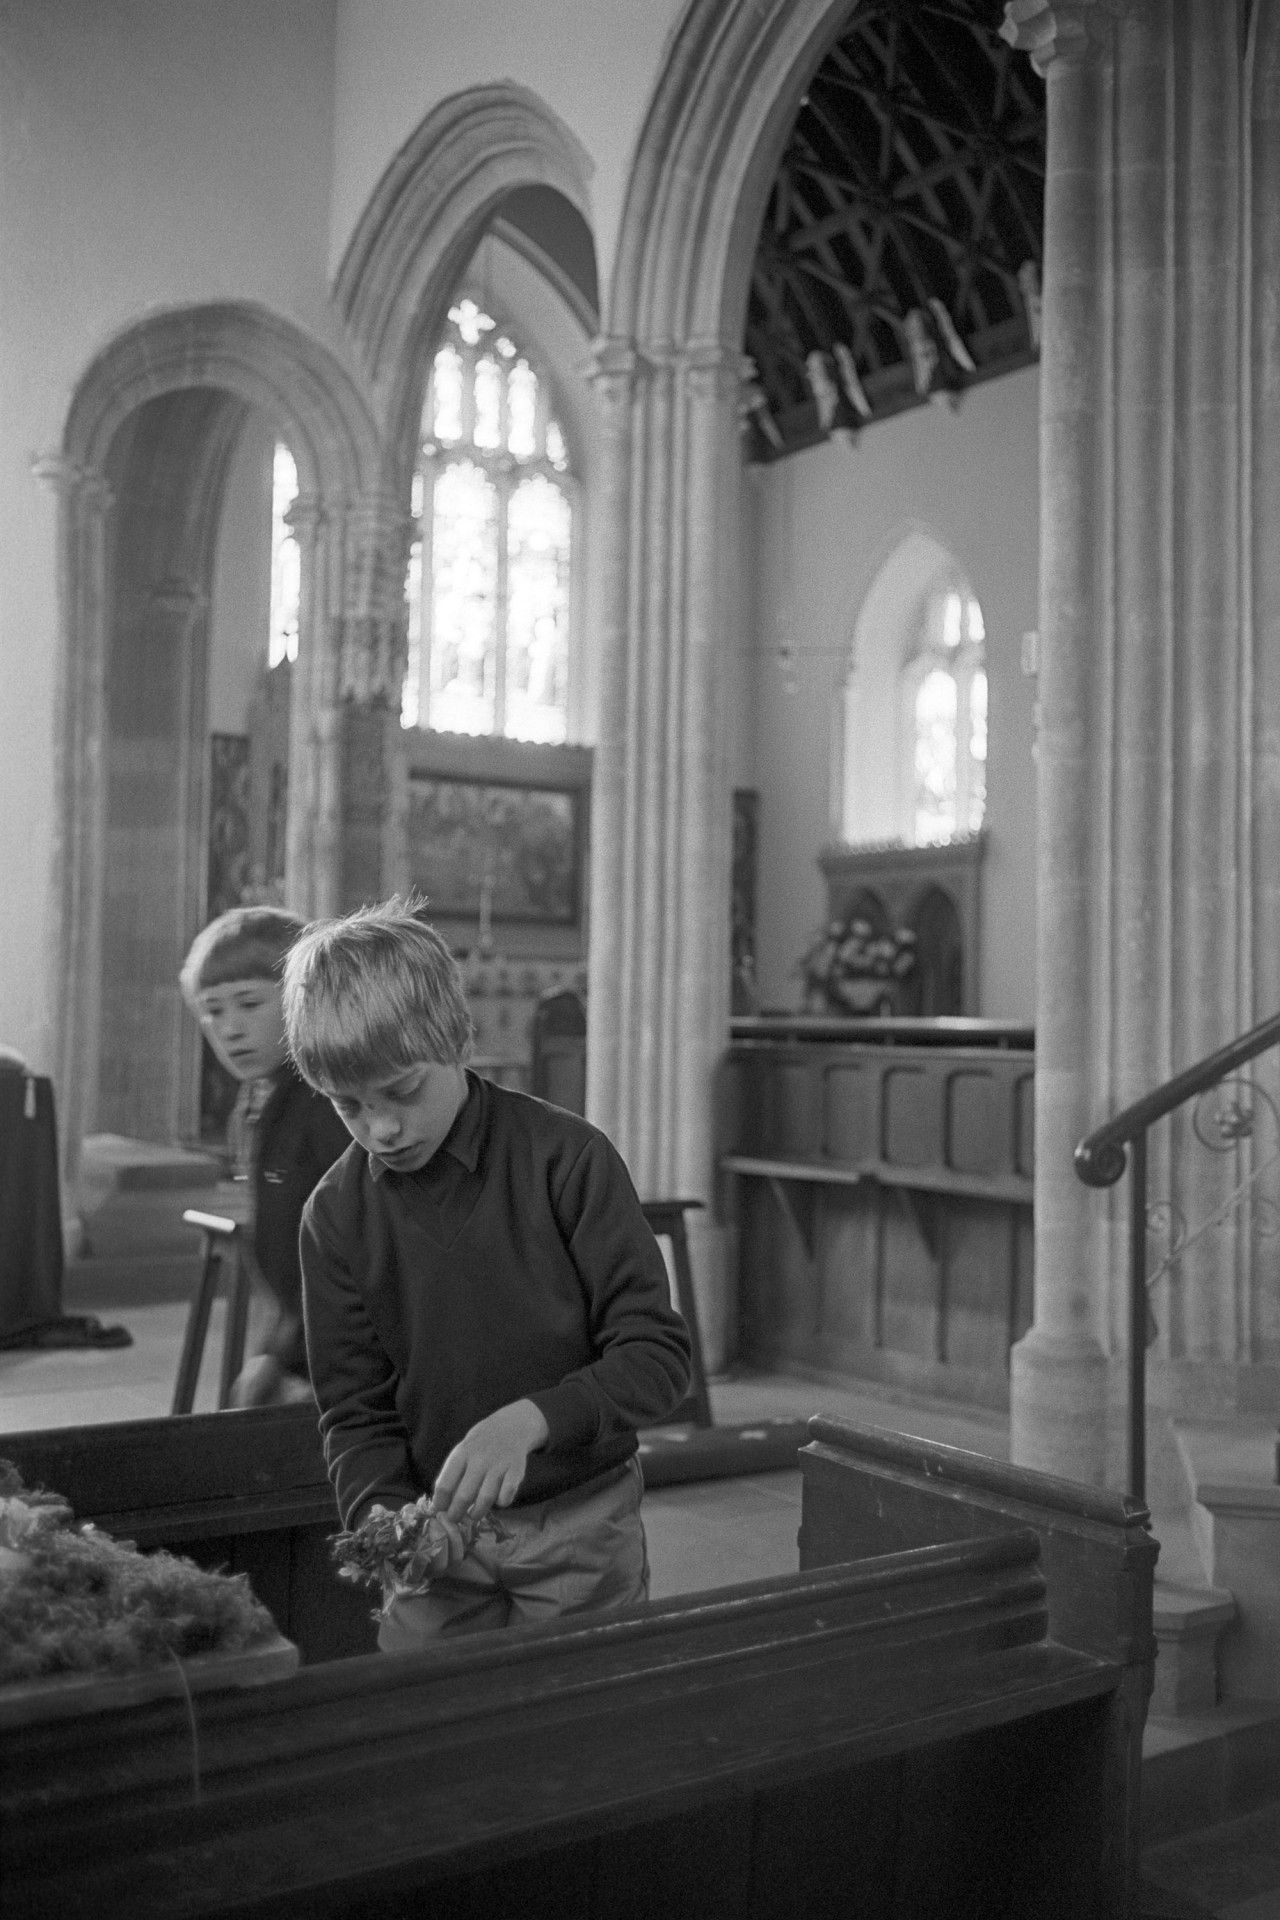 Boys arranging Church flowers. 
[Two boys arranging flowers in a pew in Chittlehampton Church. Arches and a side chapel can be seen in the background.]